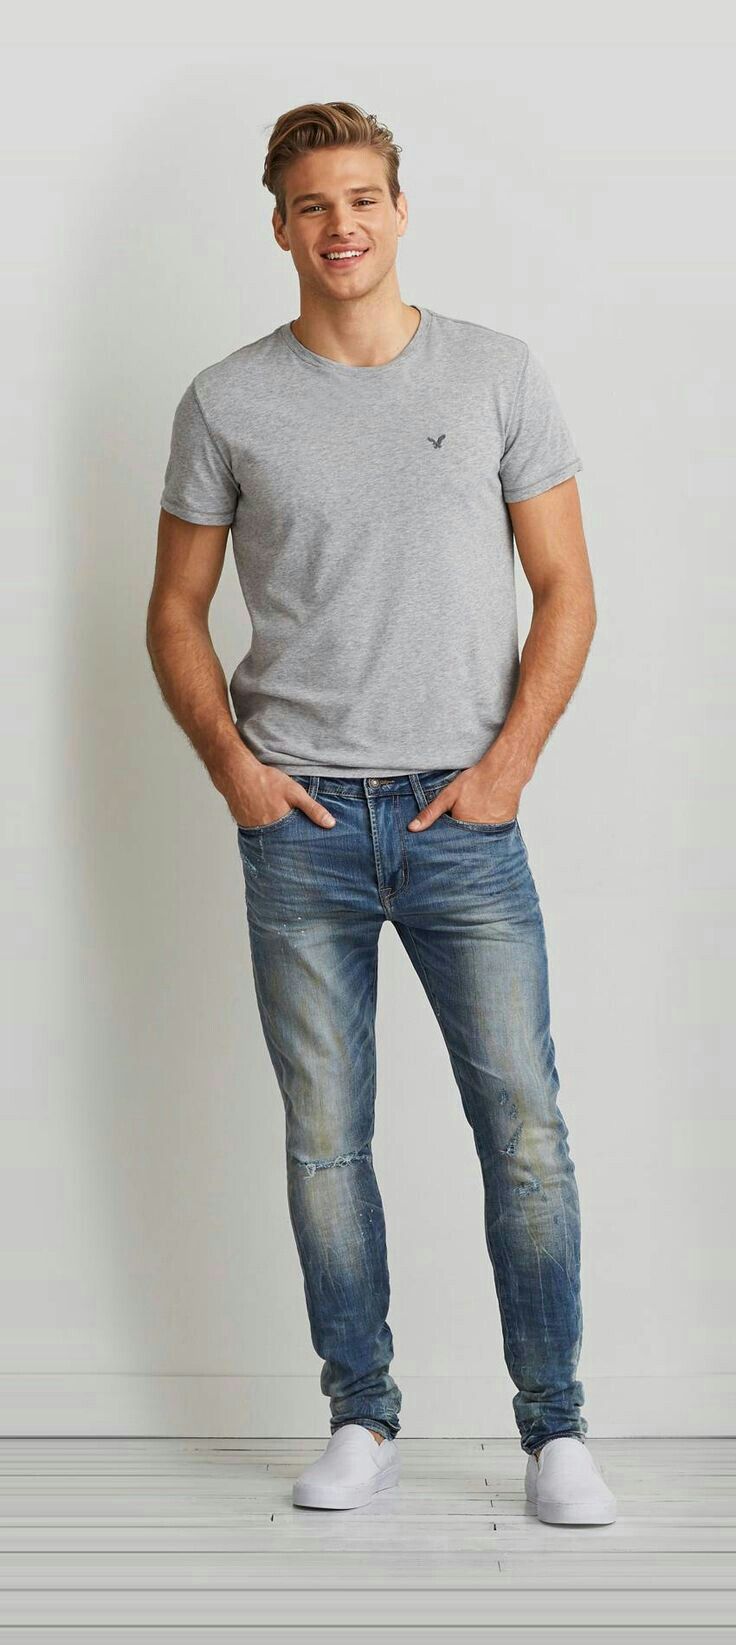 T shirt and jean trousers. 120+ Fashion Trends and Looks for College Students - 1